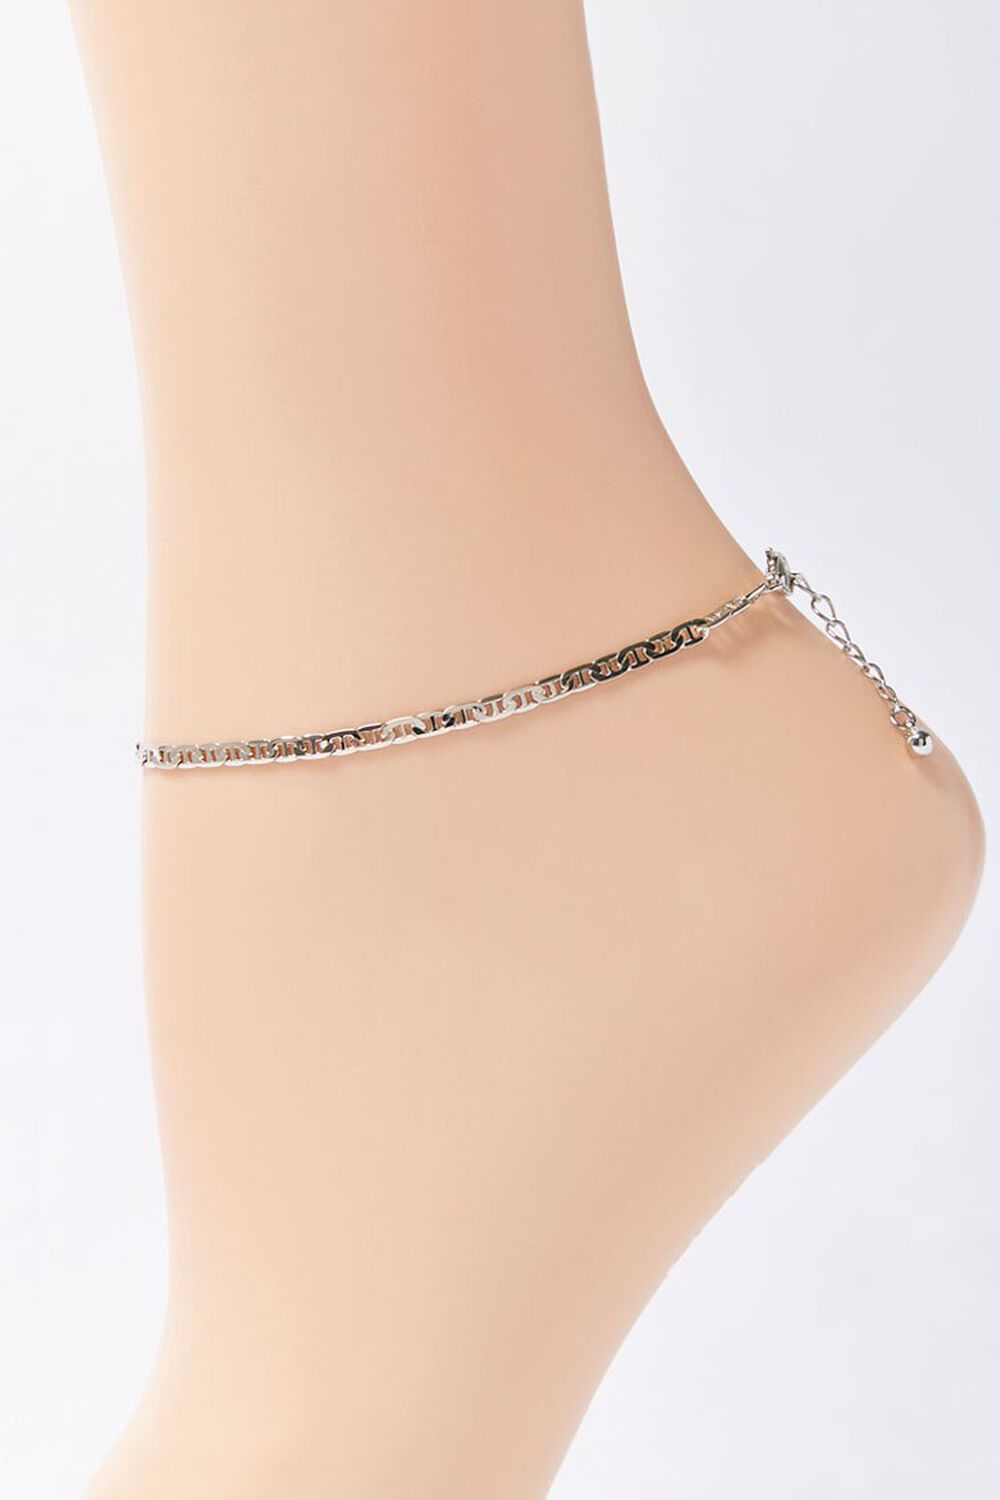 SILVER Mariner Chain Anklet, image 2